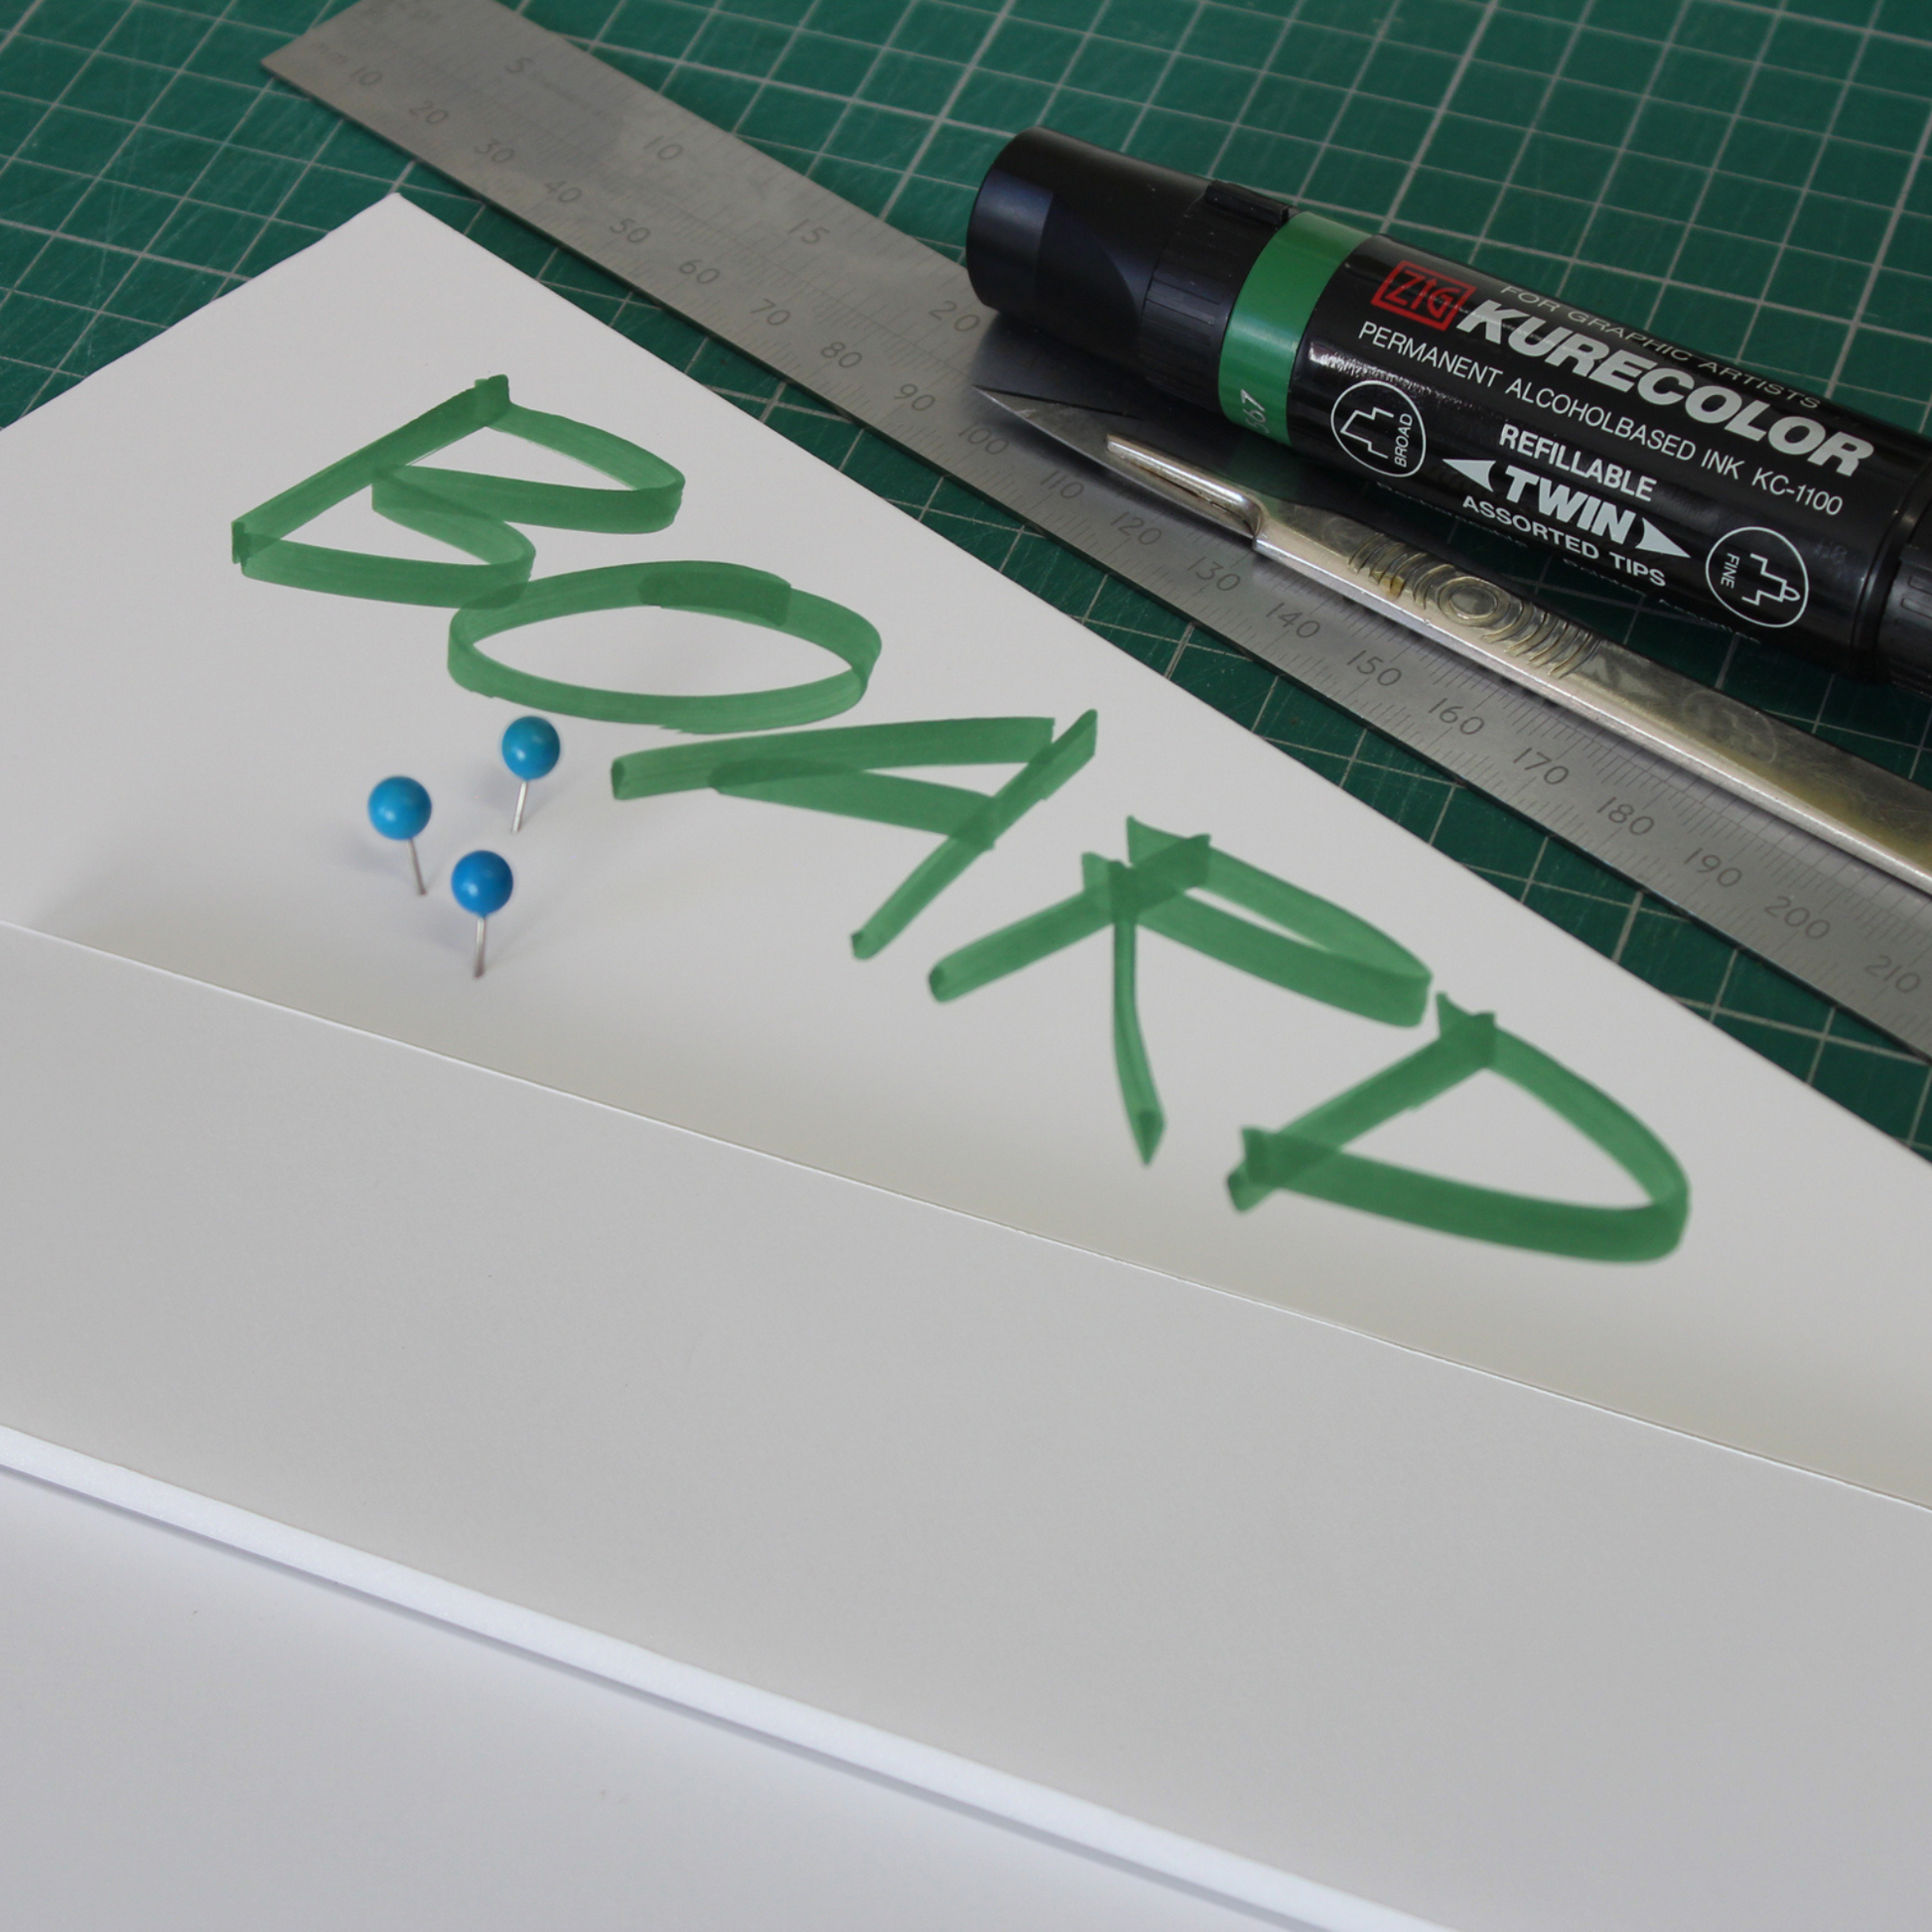 Creative display of white 5mm foam board on a cutting mat. One sheet has been cut into a long strip, and sits on top of a complete sheet, which has 'BOARD' handwritten on it in green marker pen. There are 3 pins stuck into the sheet of foamboard, and a ruler, craft knife and a green marker sit next to the foamboard, displaying the different applications and uses of the product.